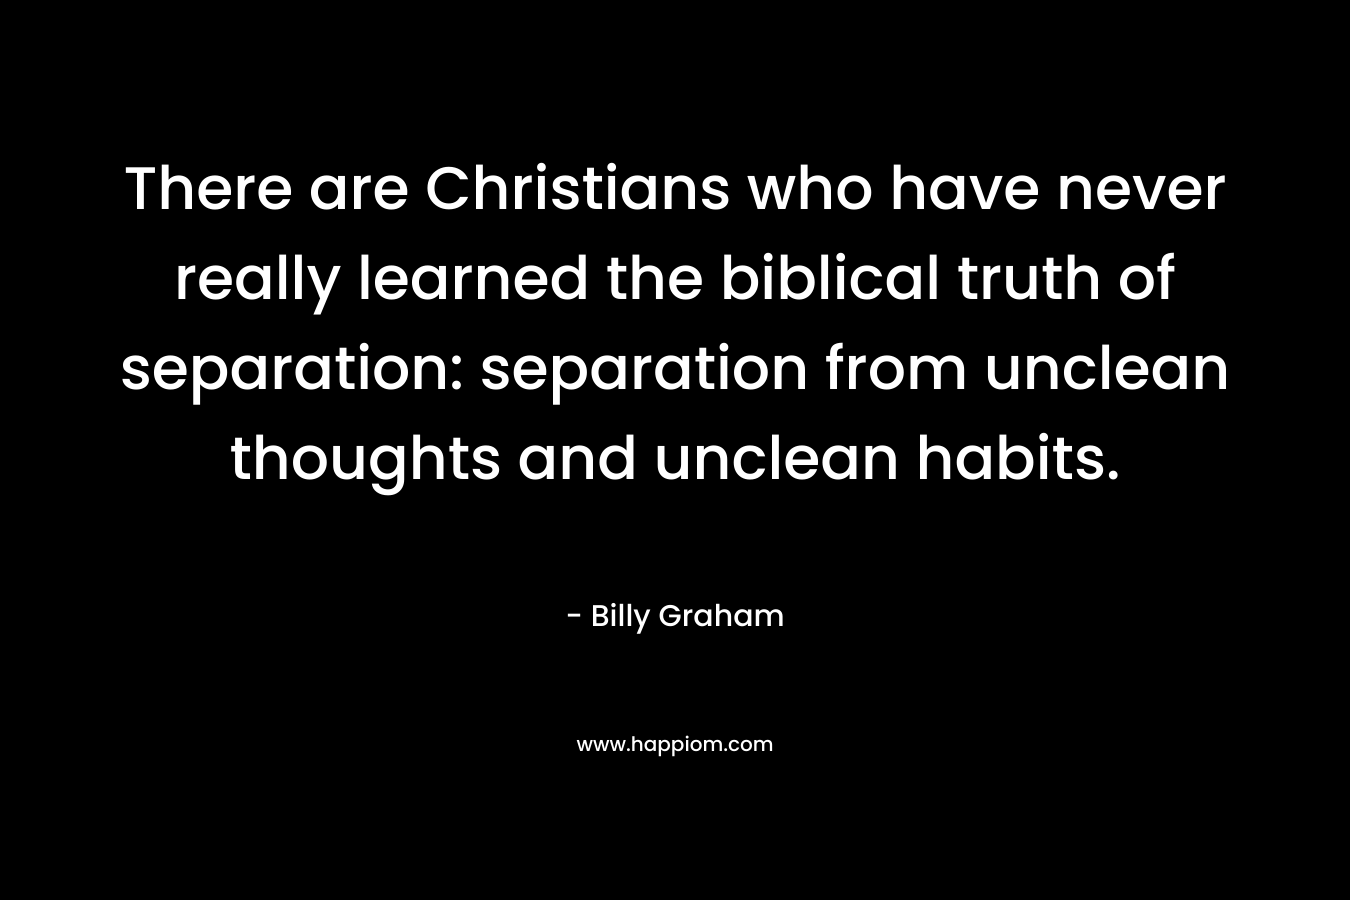 There are Christians who have never really learned the biblical truth of separation: separation from unclean thoughts and unclean habits. – Billy Graham